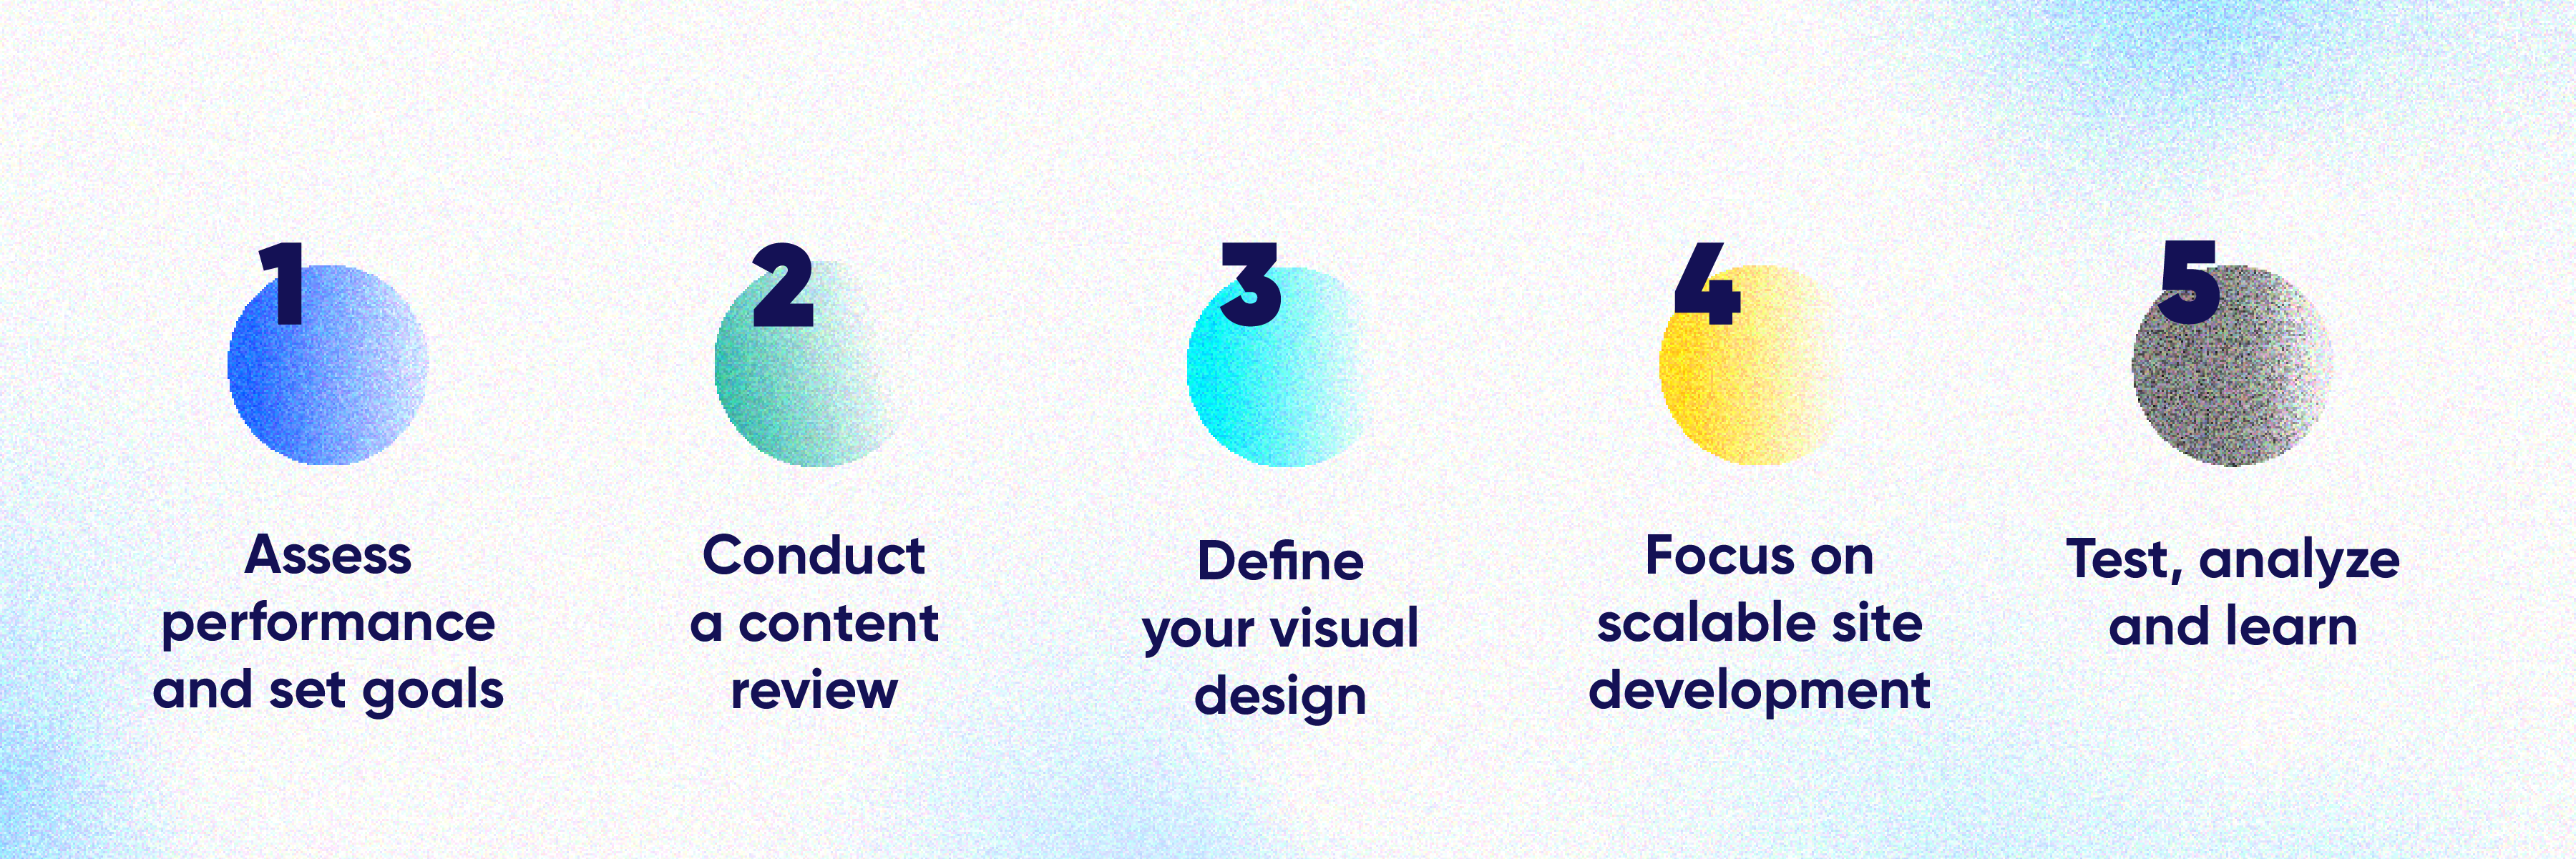 5 circles in varying colors outlining the 5 steps: Assess  performance and set goals, conduct a content review, define your visual design, focus on scalable site development, test analyze and learn